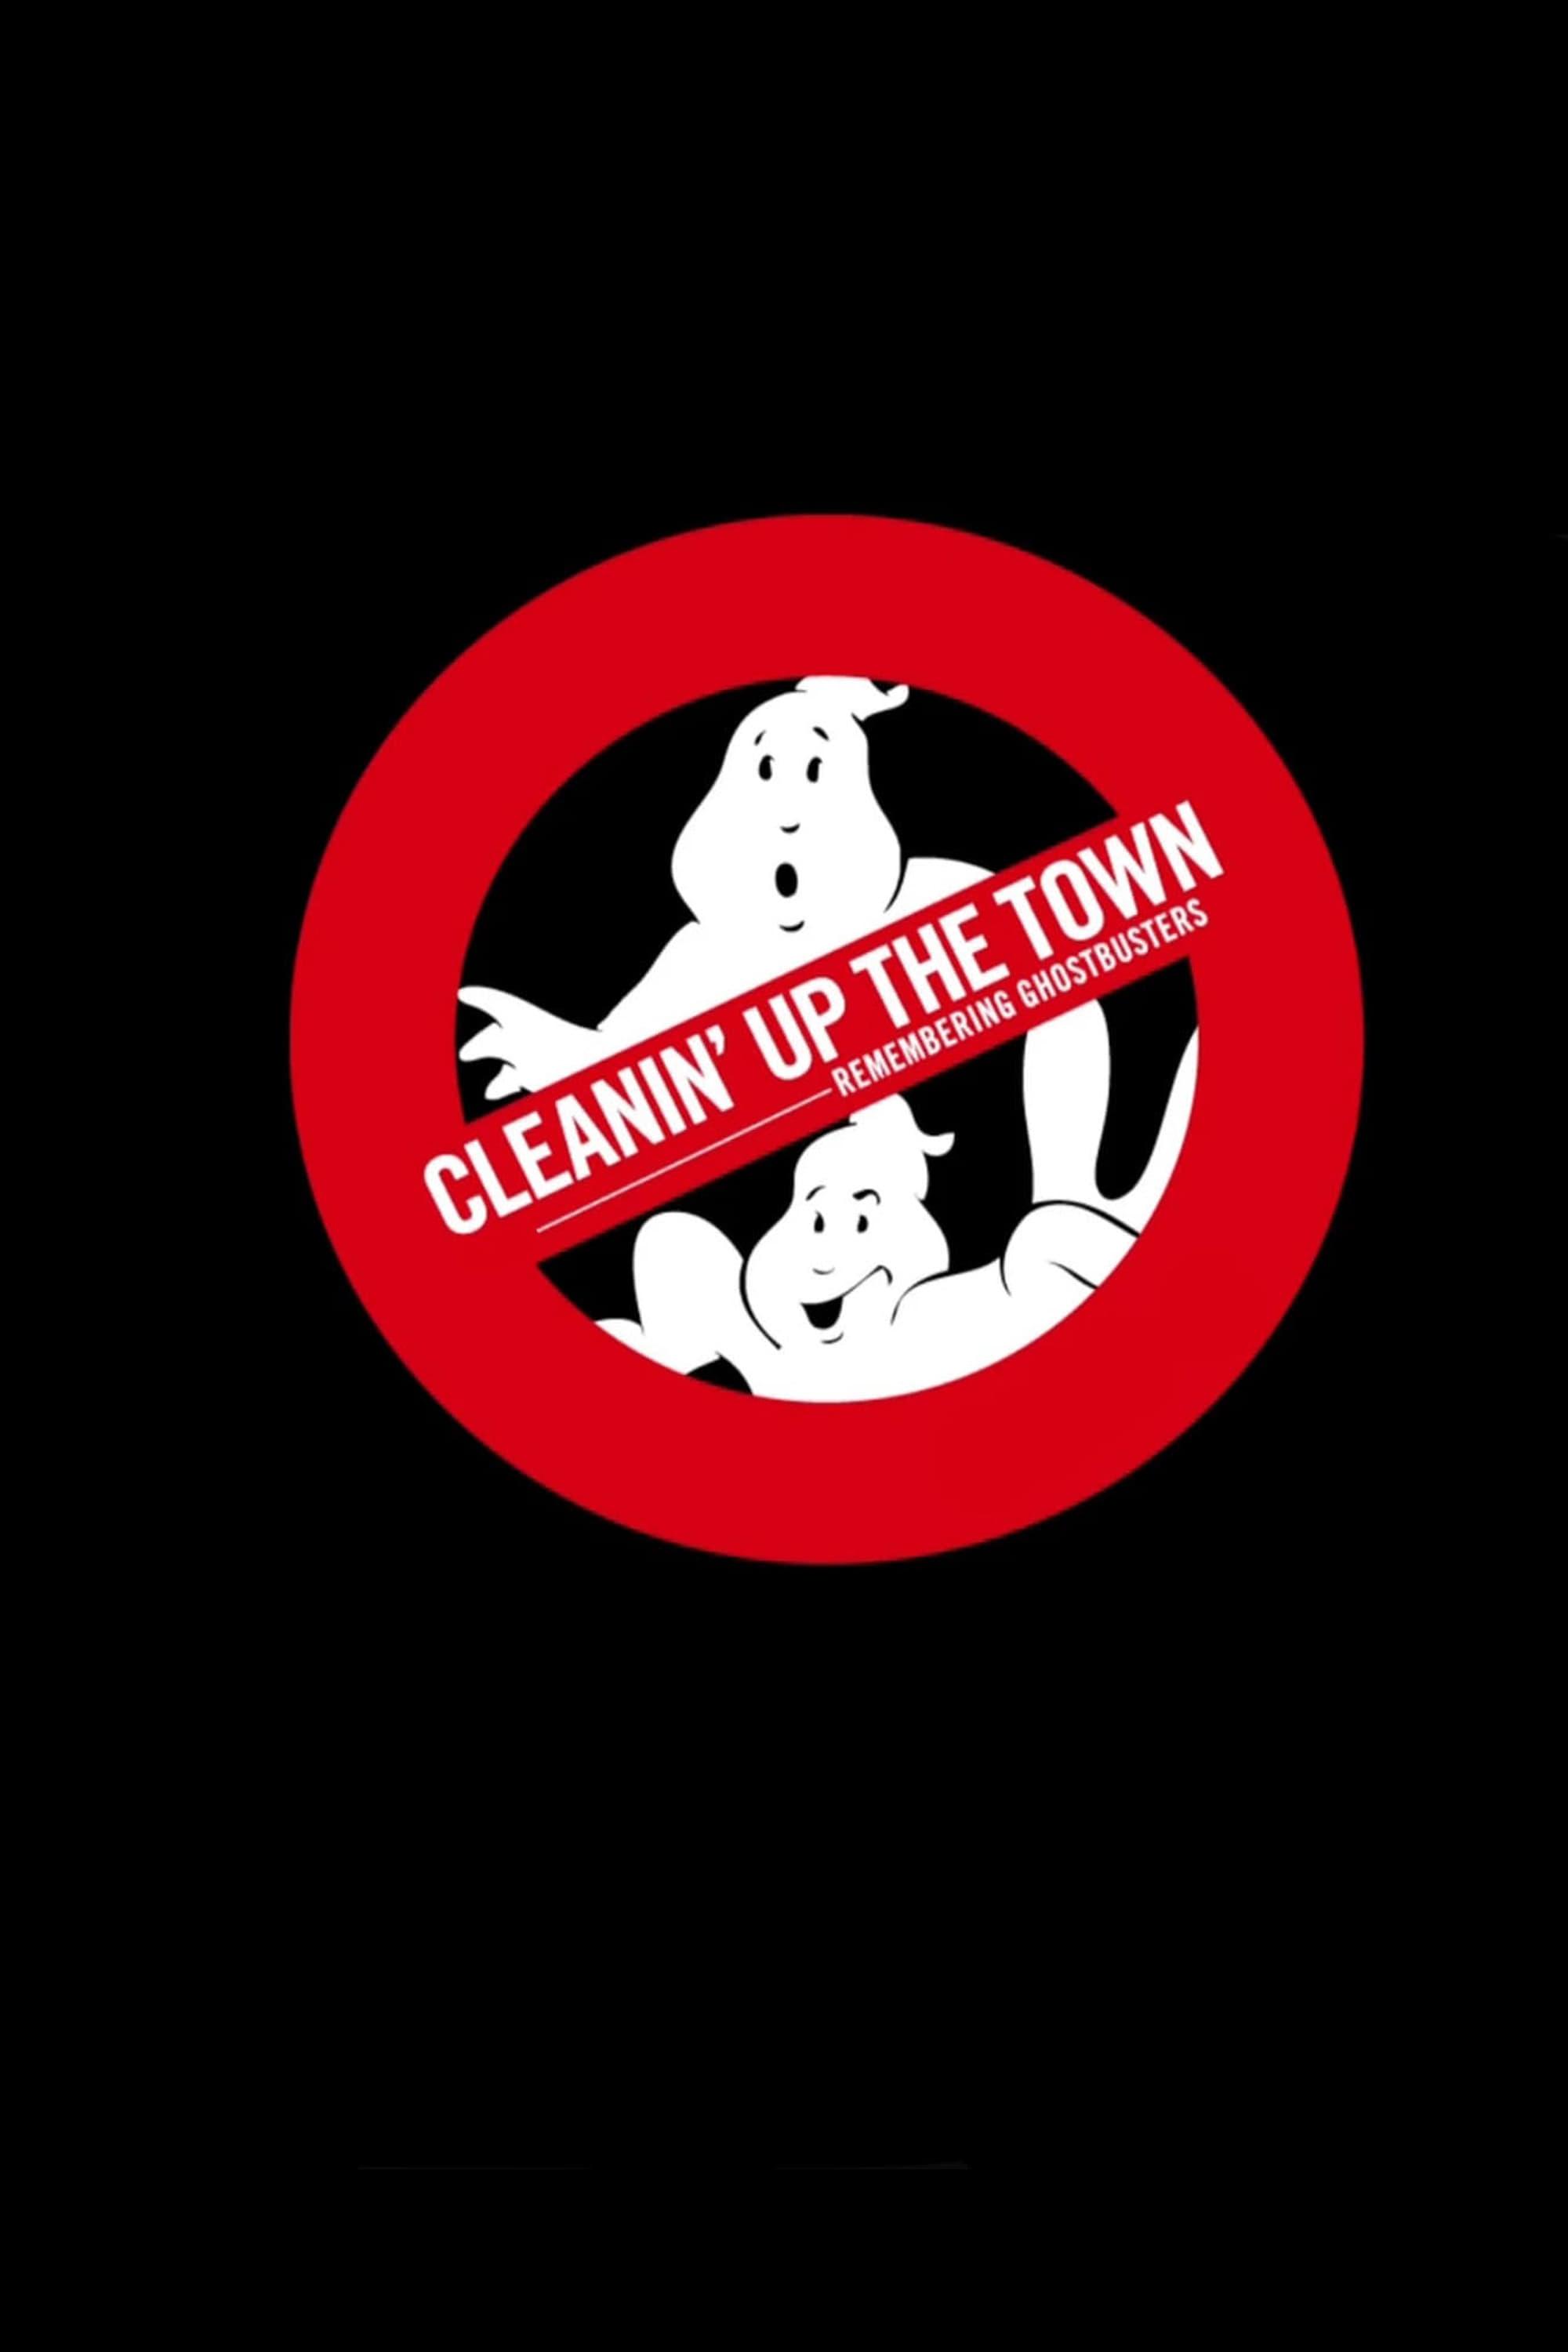 Cleanin' Up the Town: Remembering Ghostbusters poster